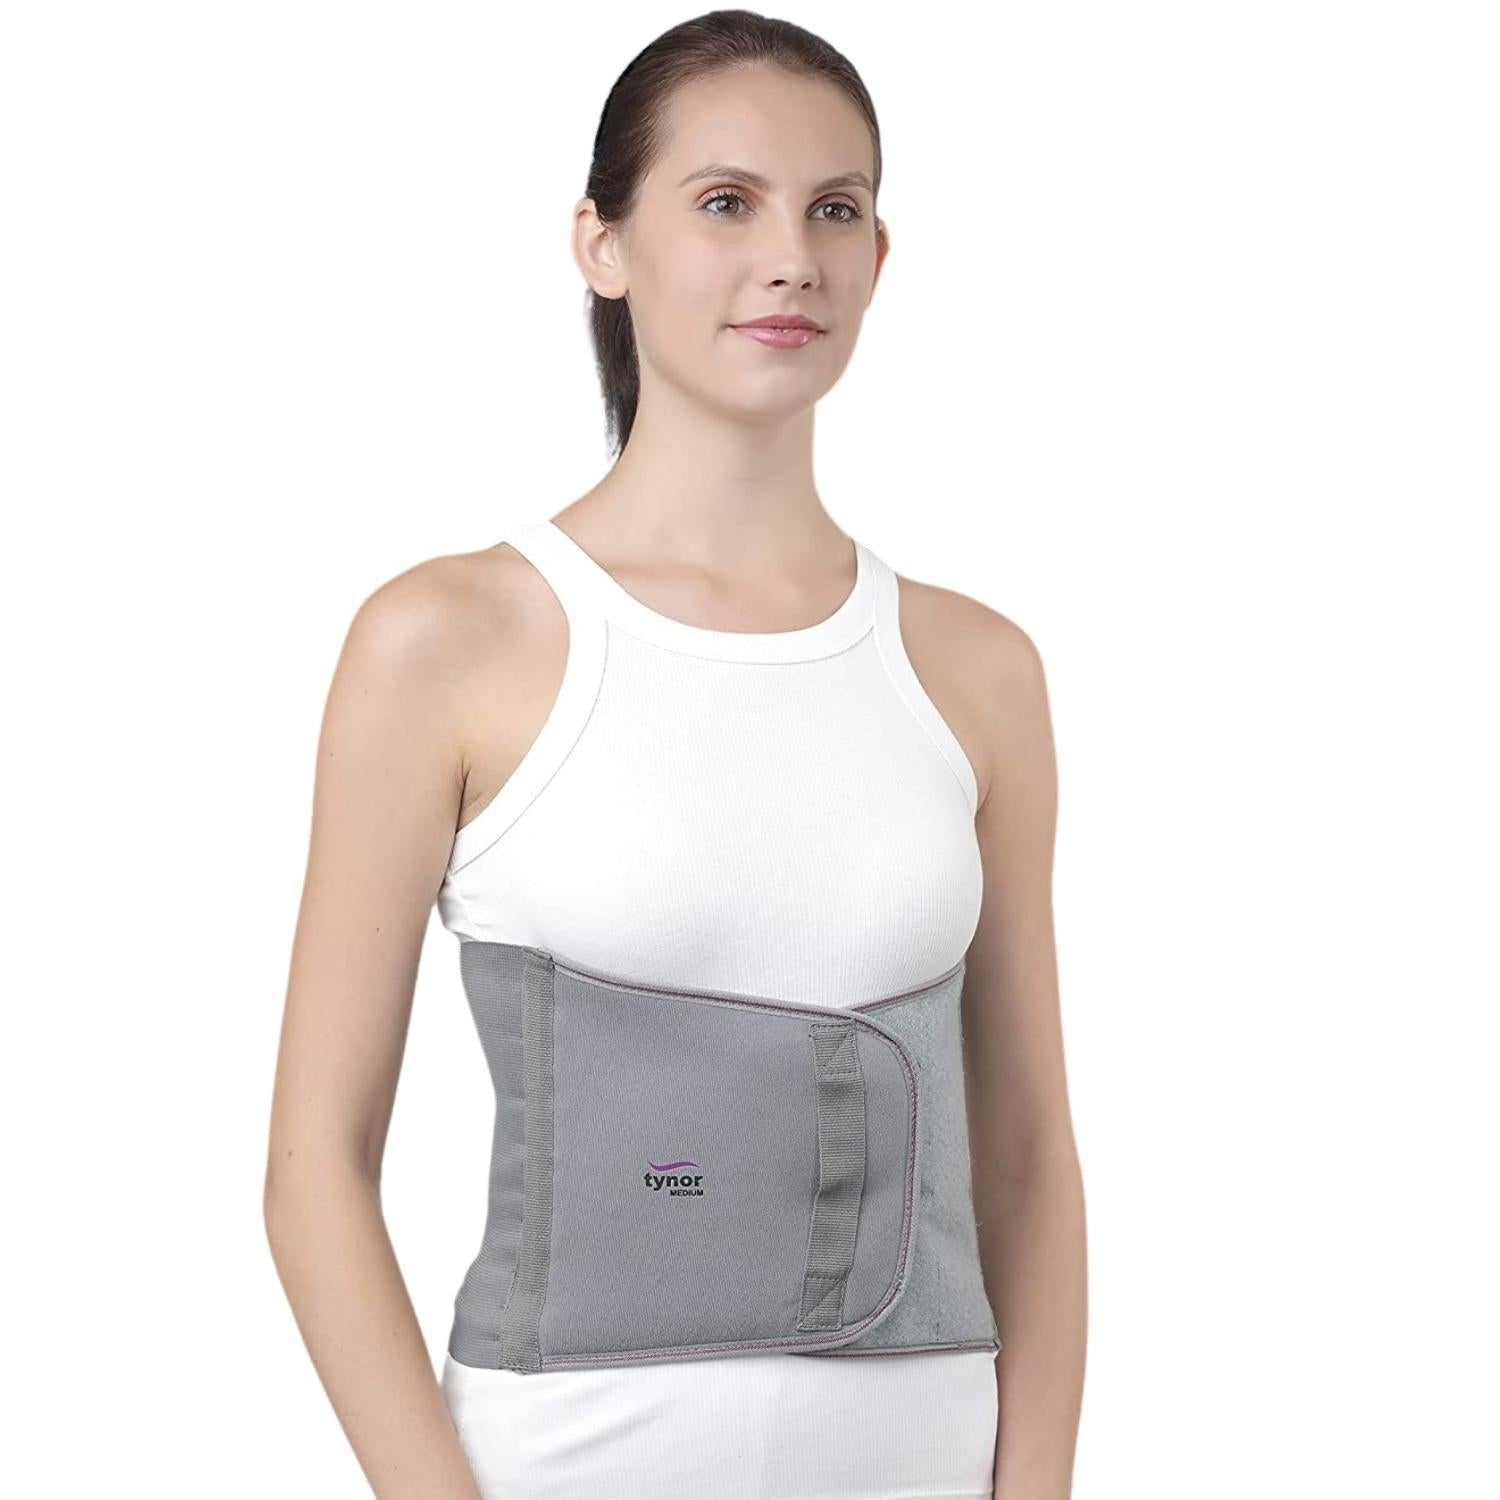 Belt for Umbilical Hernia Reduction - Removable Pillow